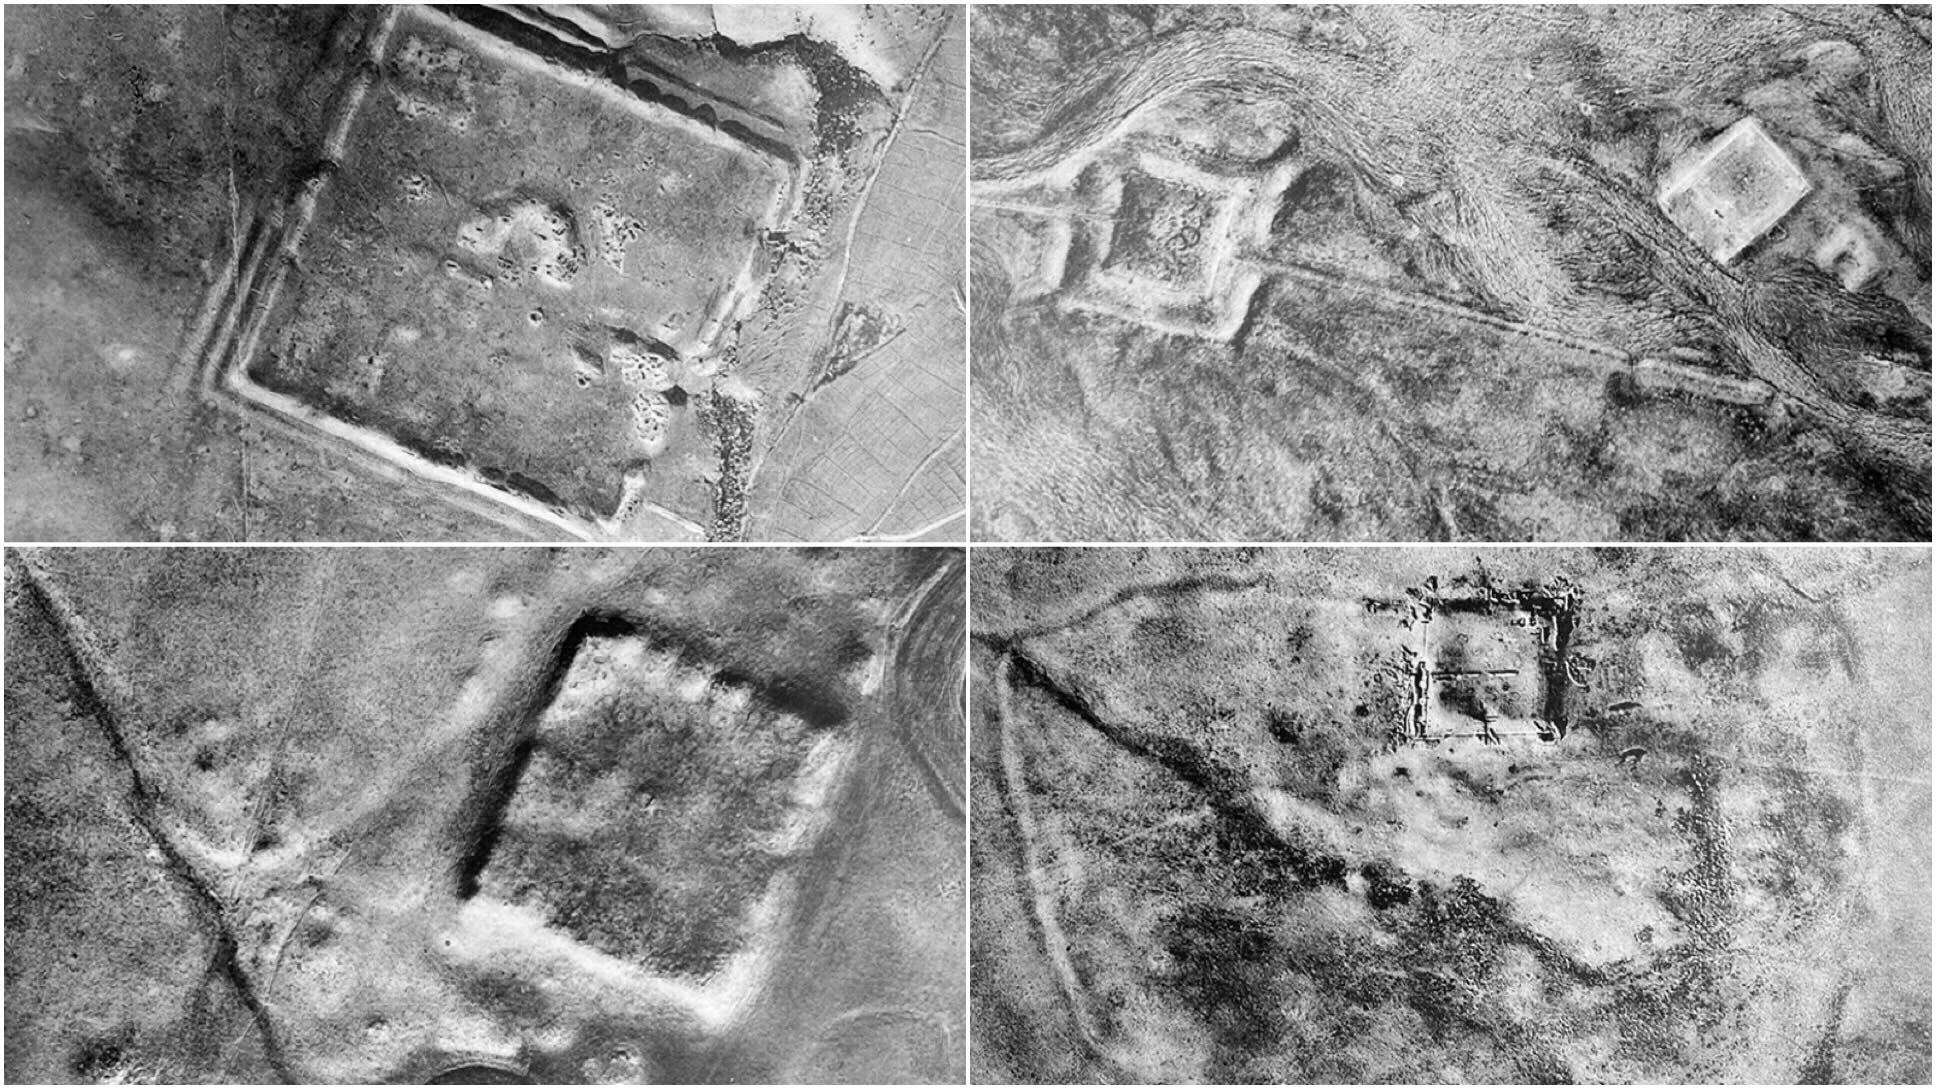 Declassified spy satellite images reveal 400 Roman Empire forts in the Middle East Space